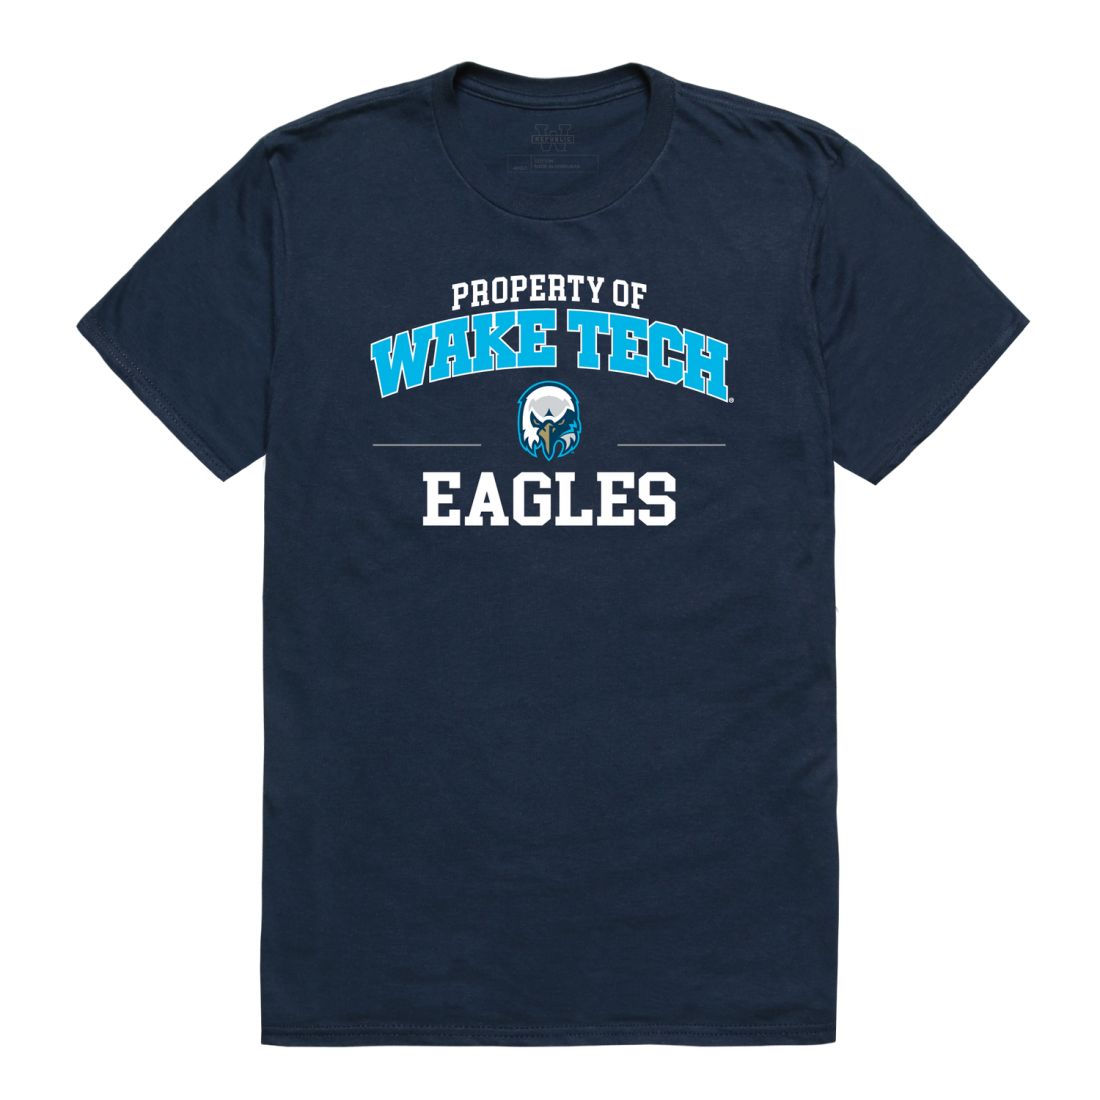 Wake Technical Community College Eagles Property T-Shirt